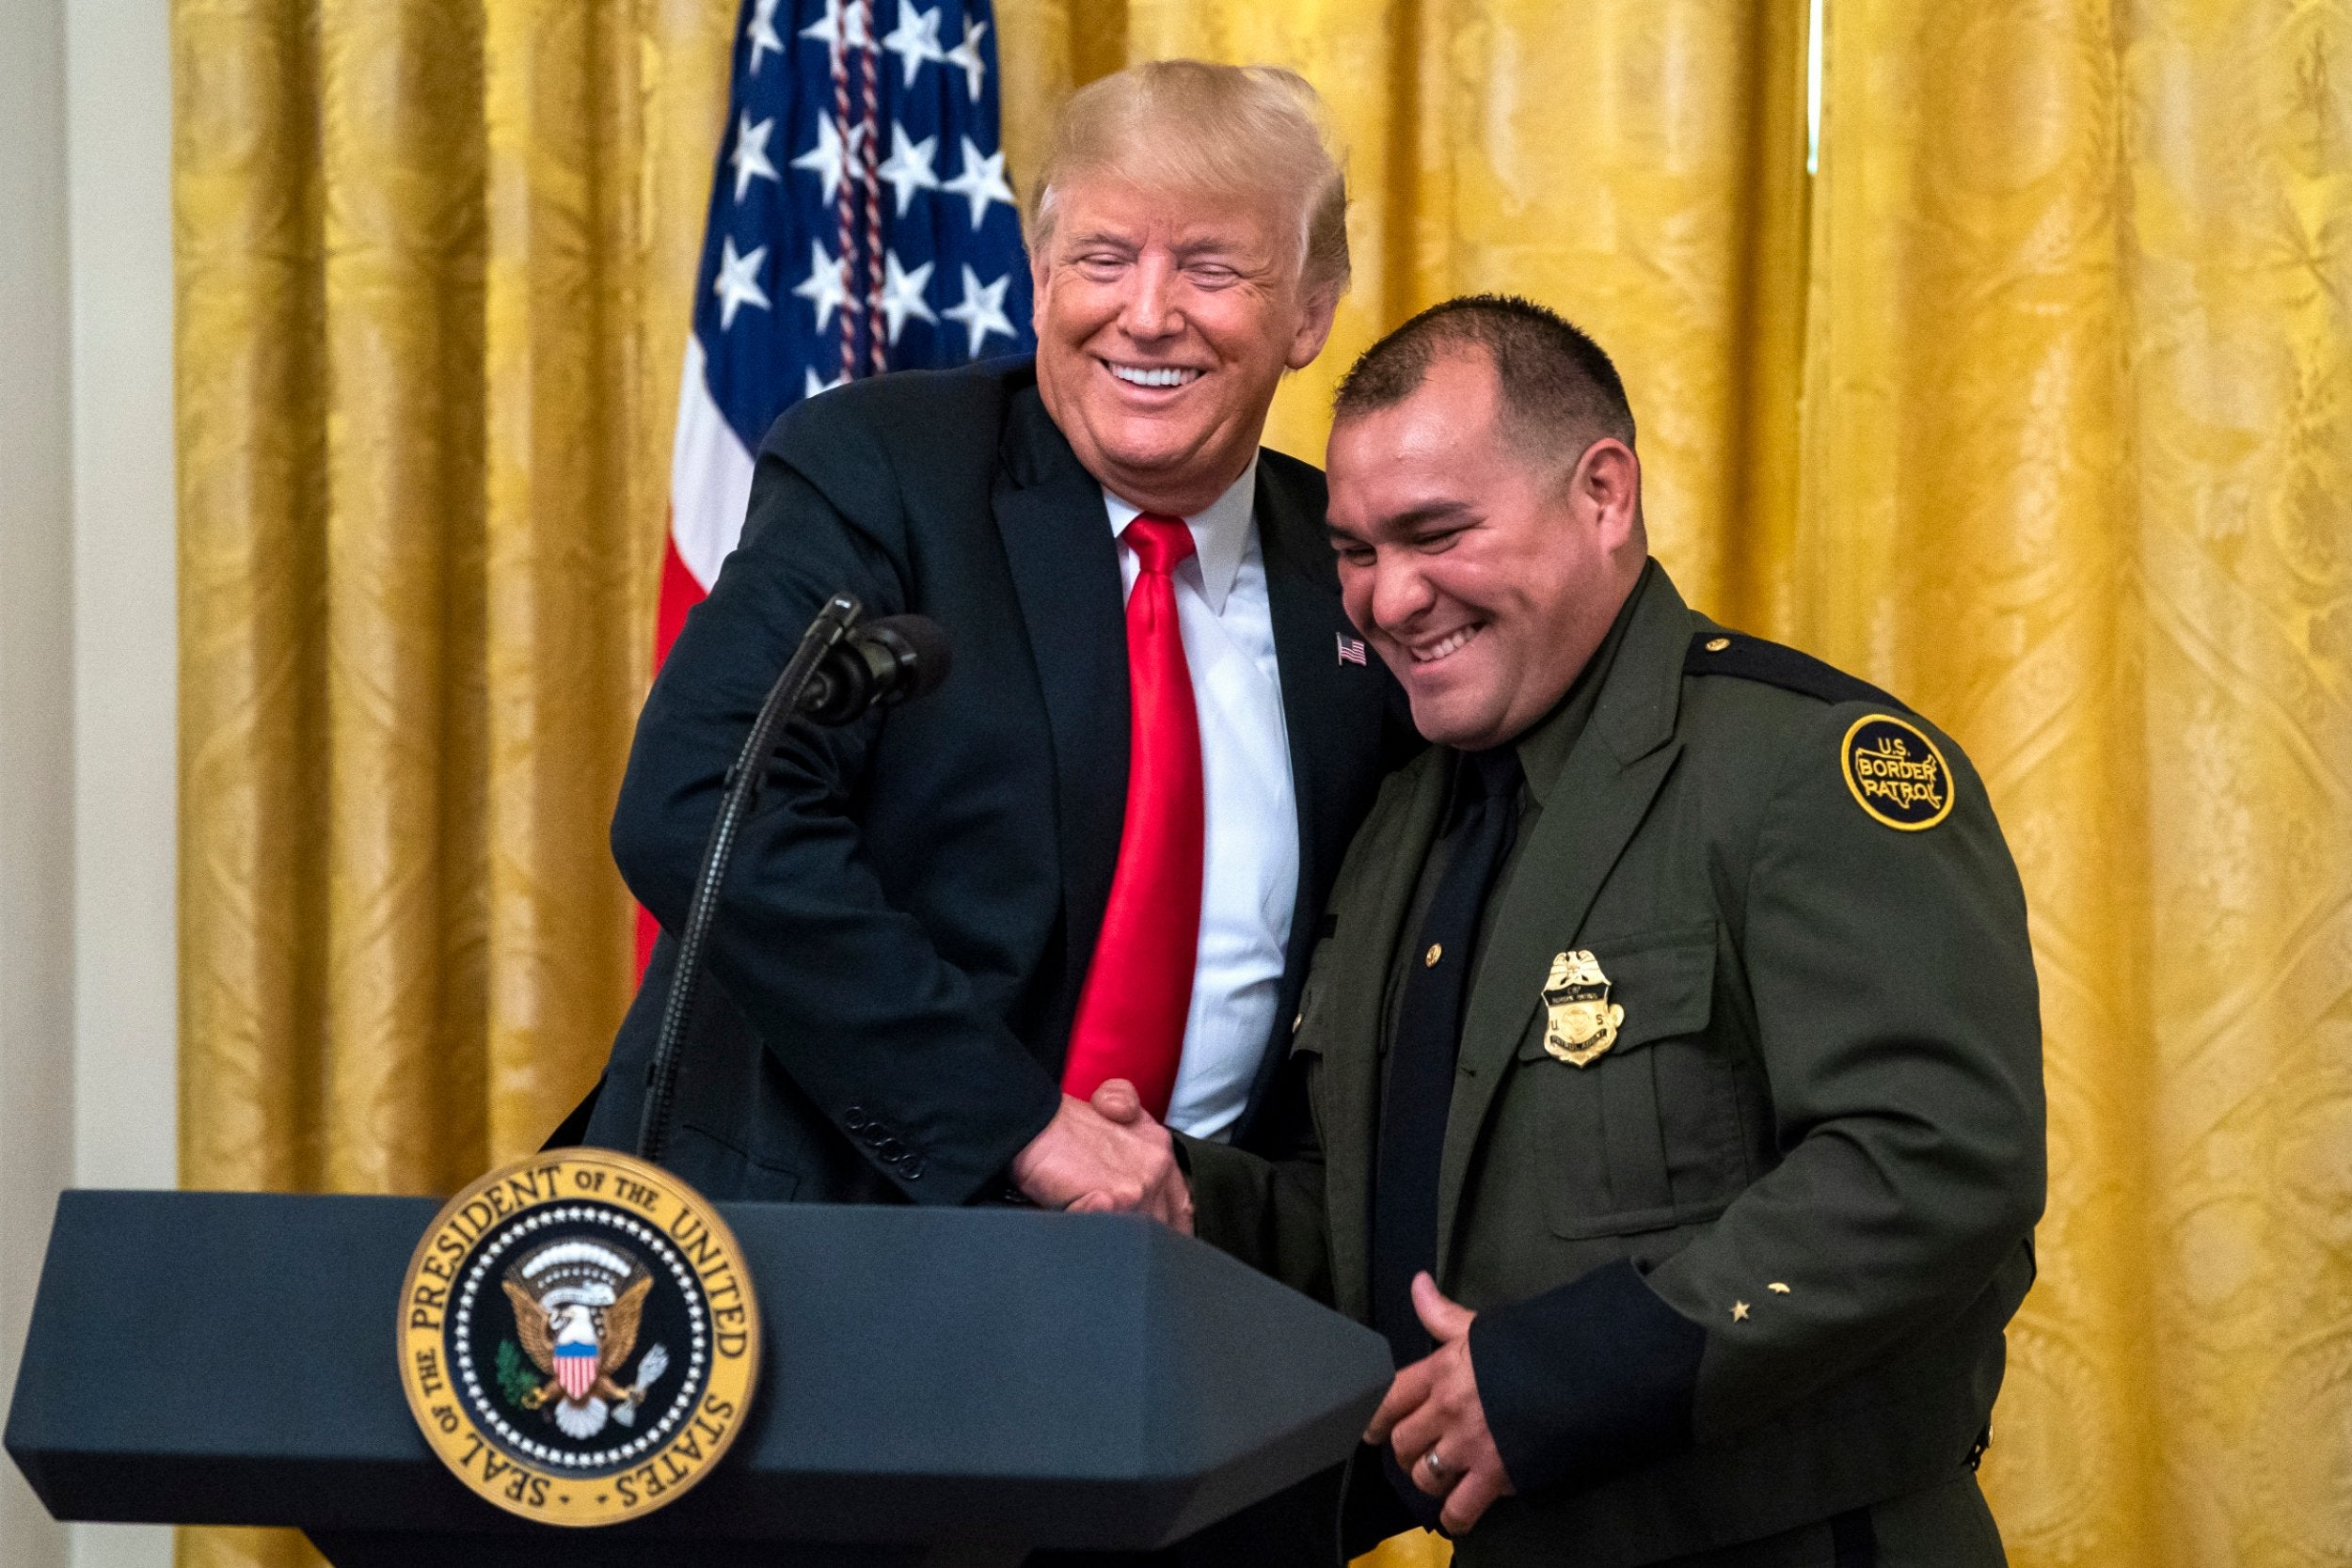 Mr Trump called a Border Patrol agent up to speak during his White House event